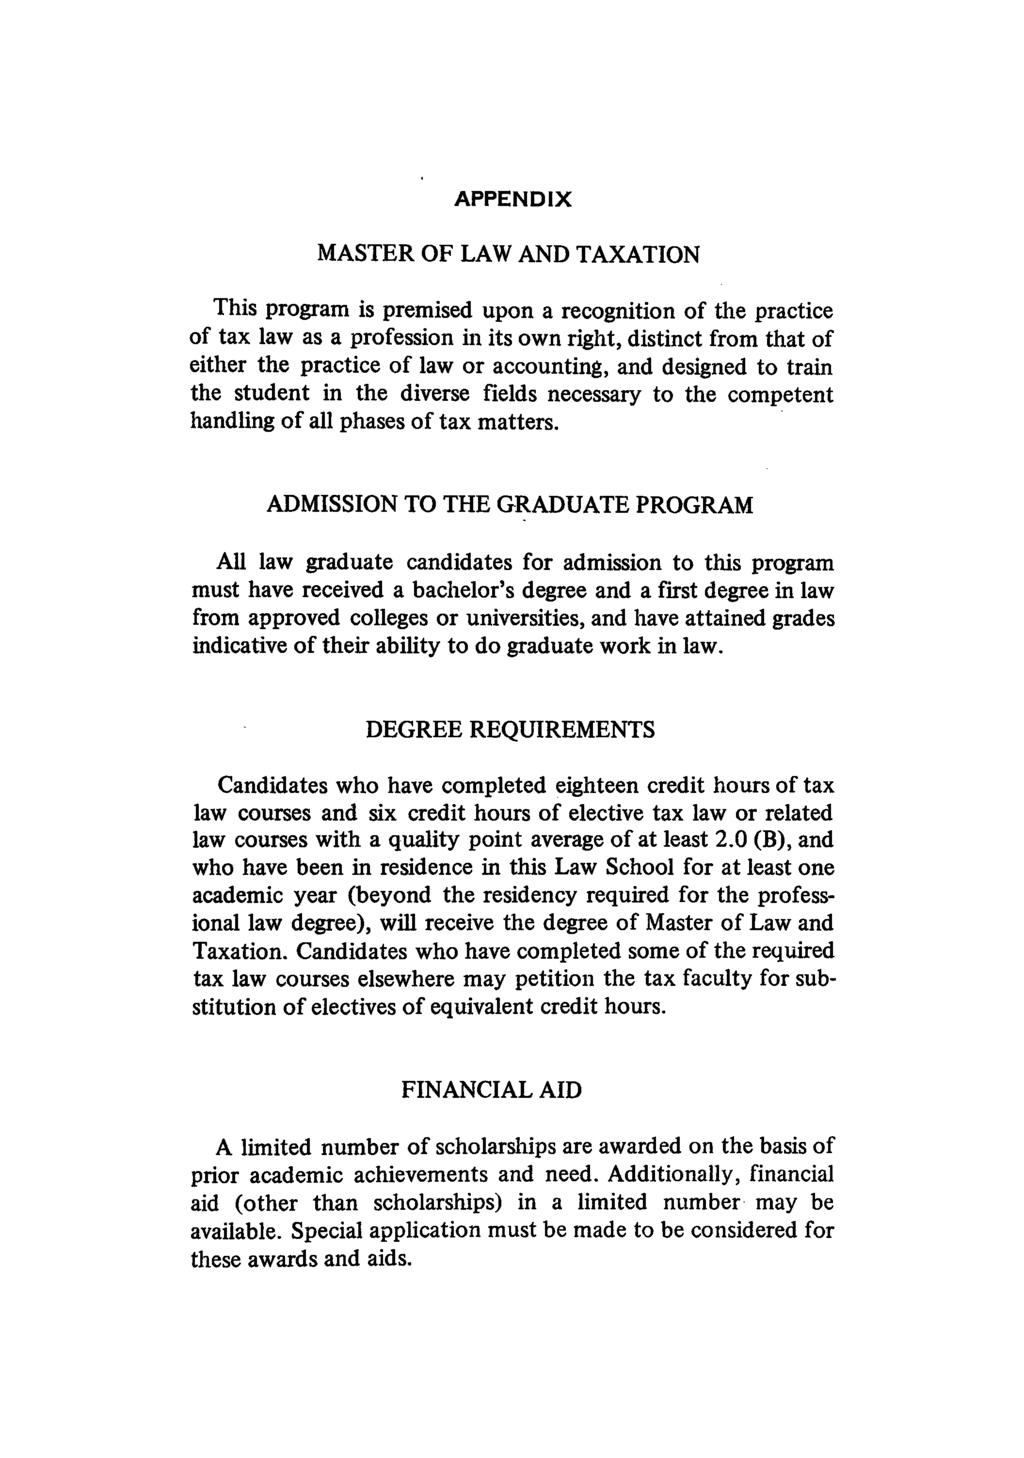 APPENDIX MASTER OF LAW AND TAXATION This program is premised upon a recognition of the practice of tax law as a profession in its own right, distinct from that of either the practice of law or